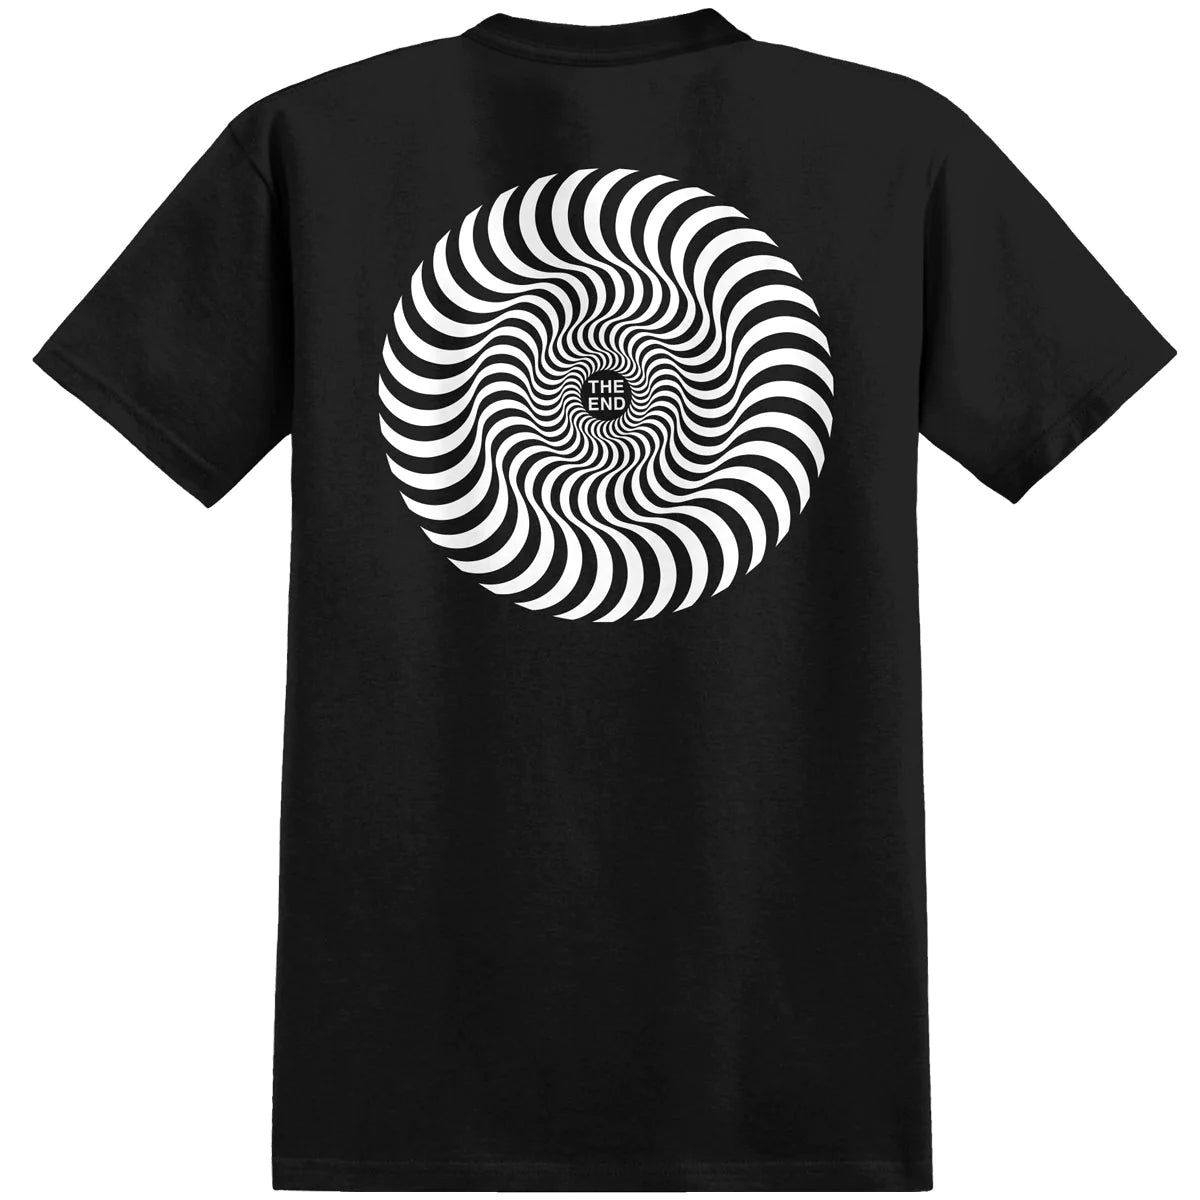 Classic Swirl S/S Shirt BLK/WHT (size options listed)